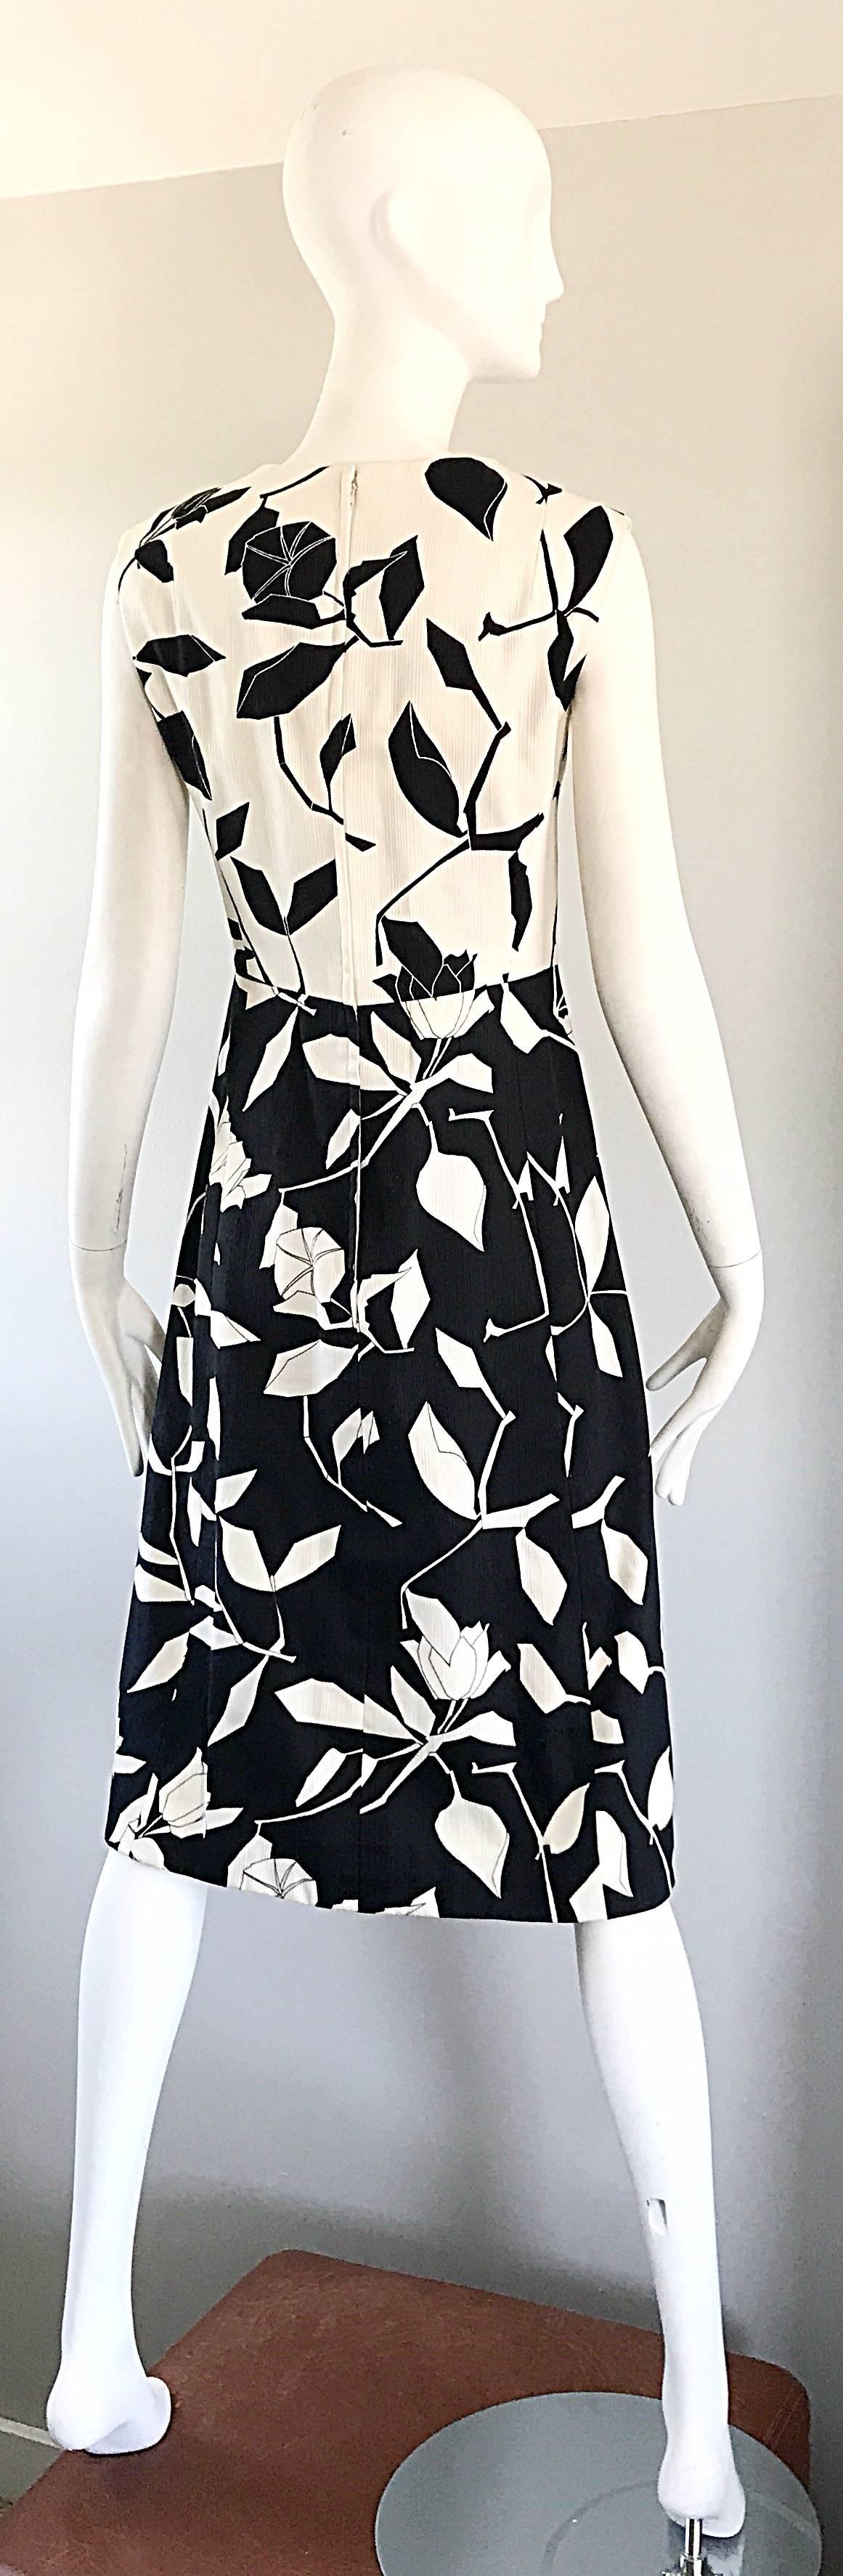 Chic 1960s Black and White Abstract Floral A Line Sleeveless Vintage 60s Dress  1